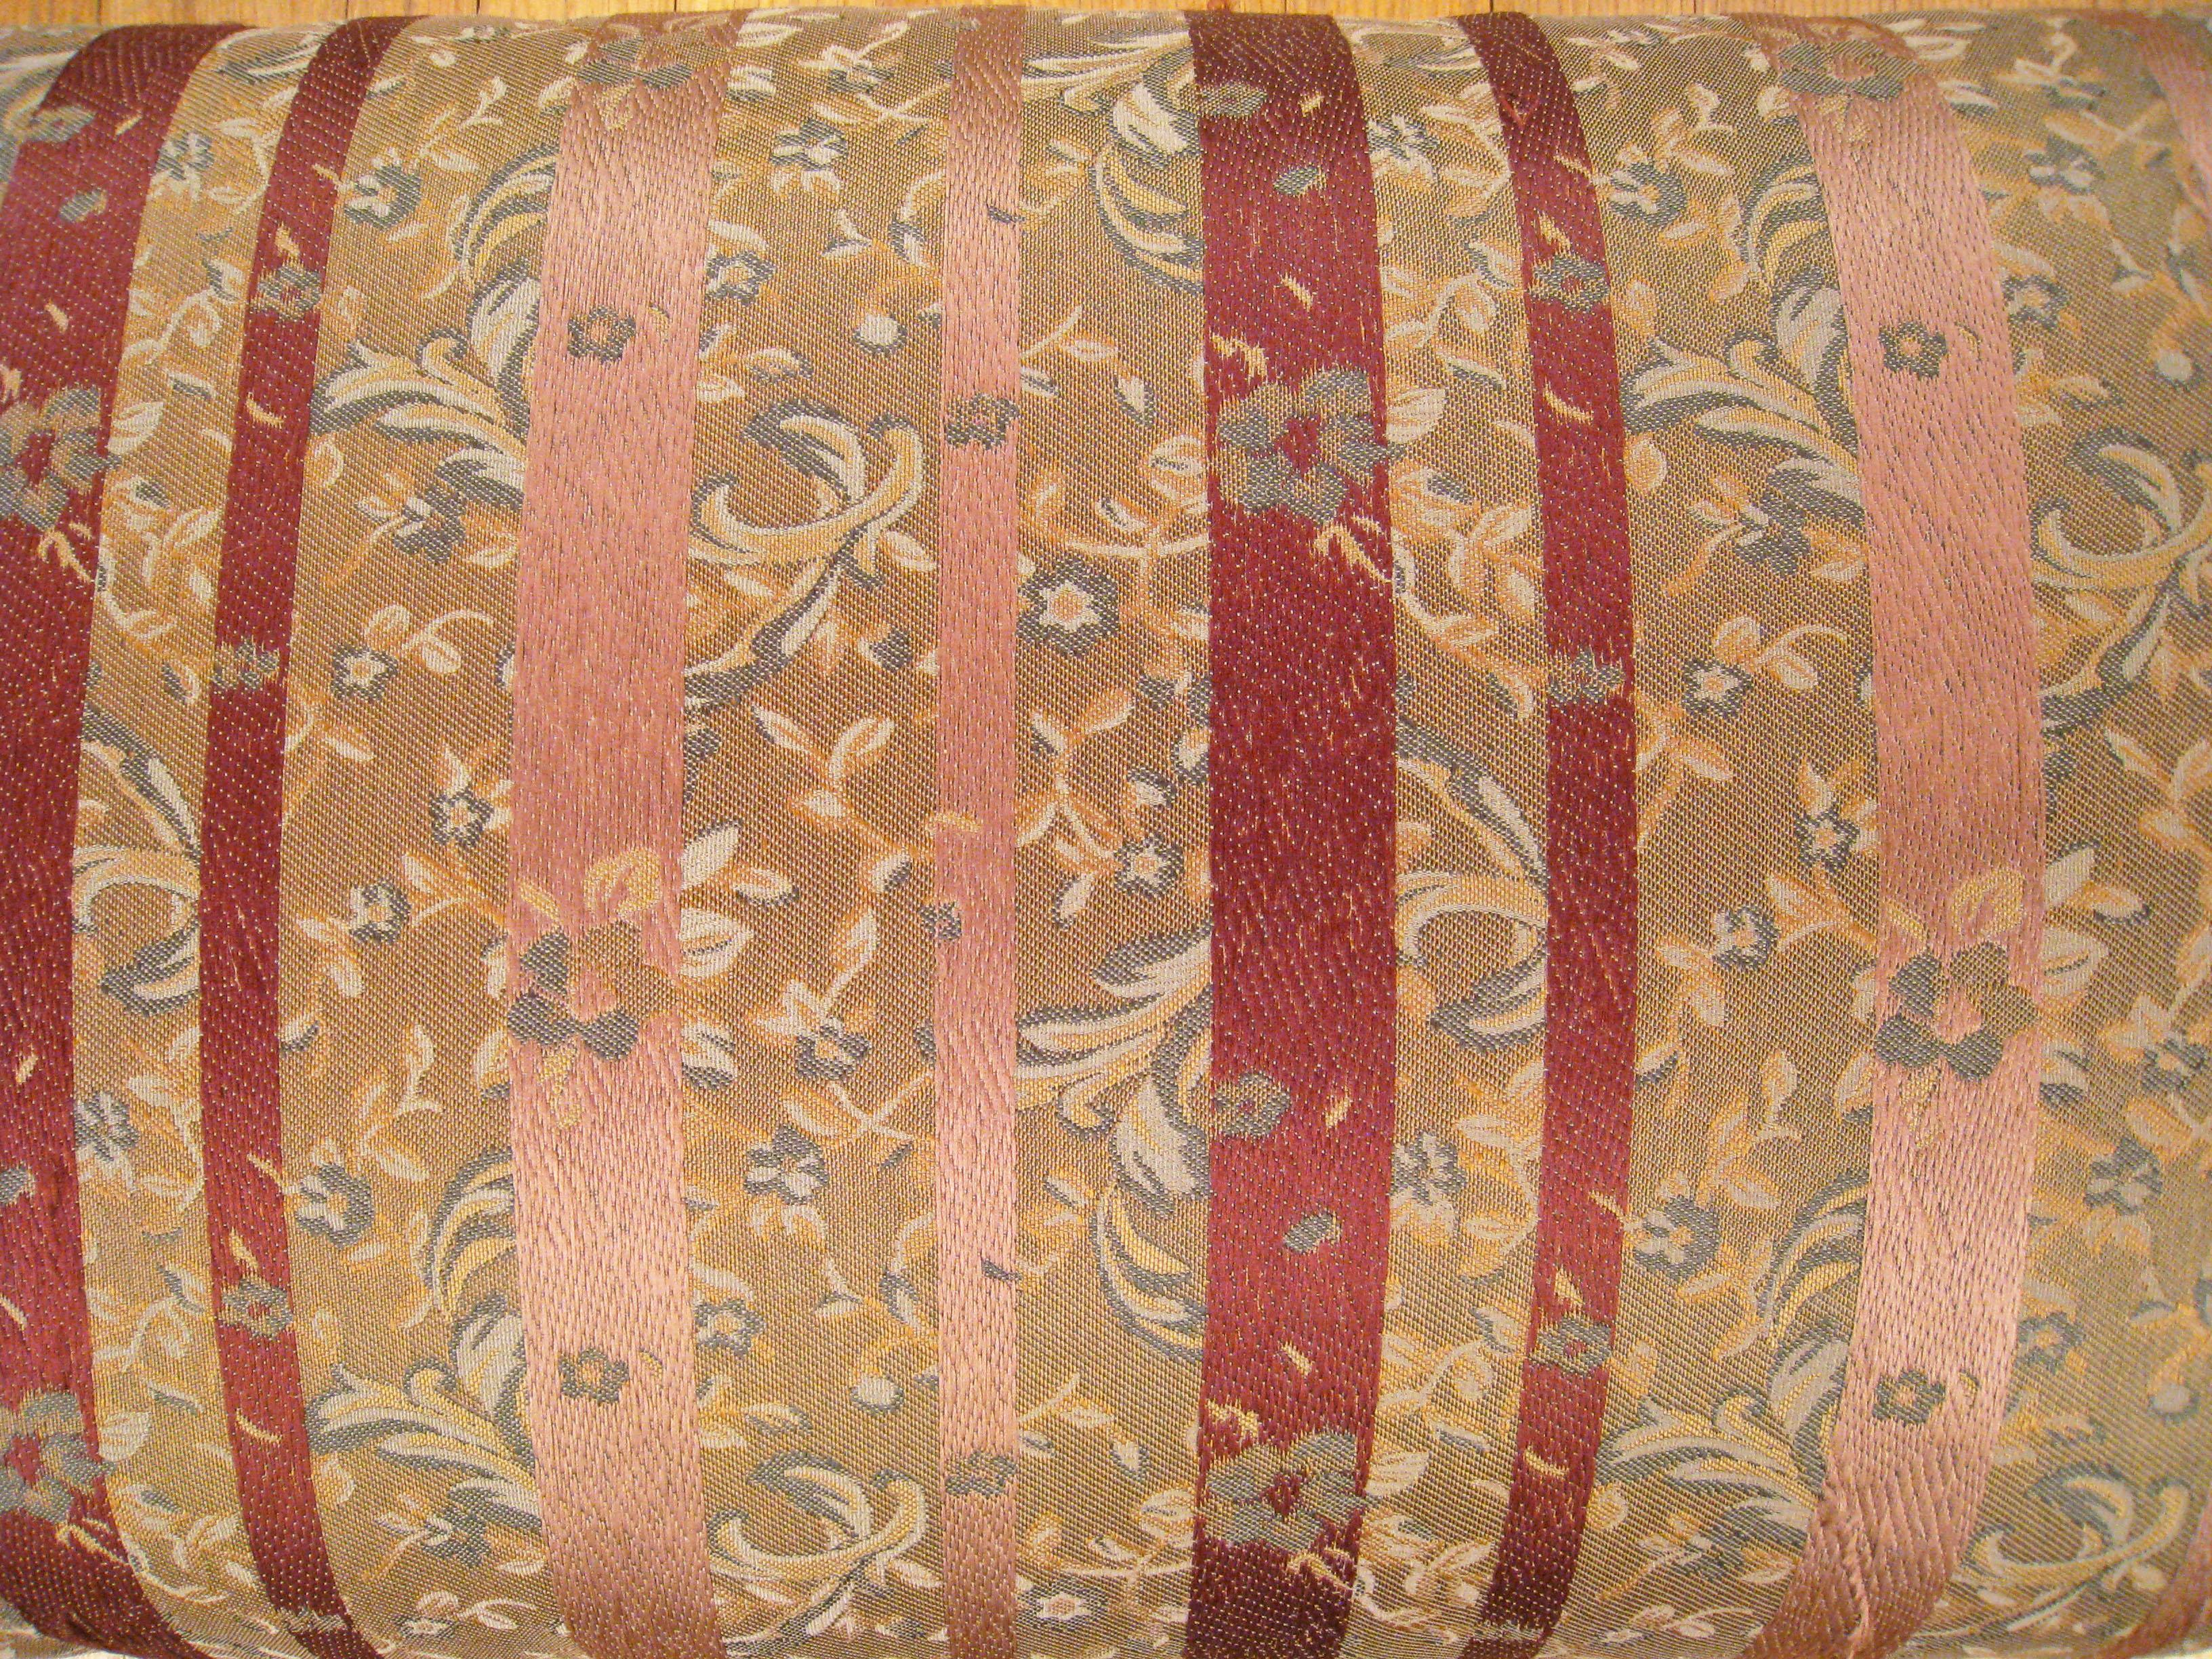 Satin Vintage Decorative Chinoiserie Brocade Pillow with Stripes For Sale